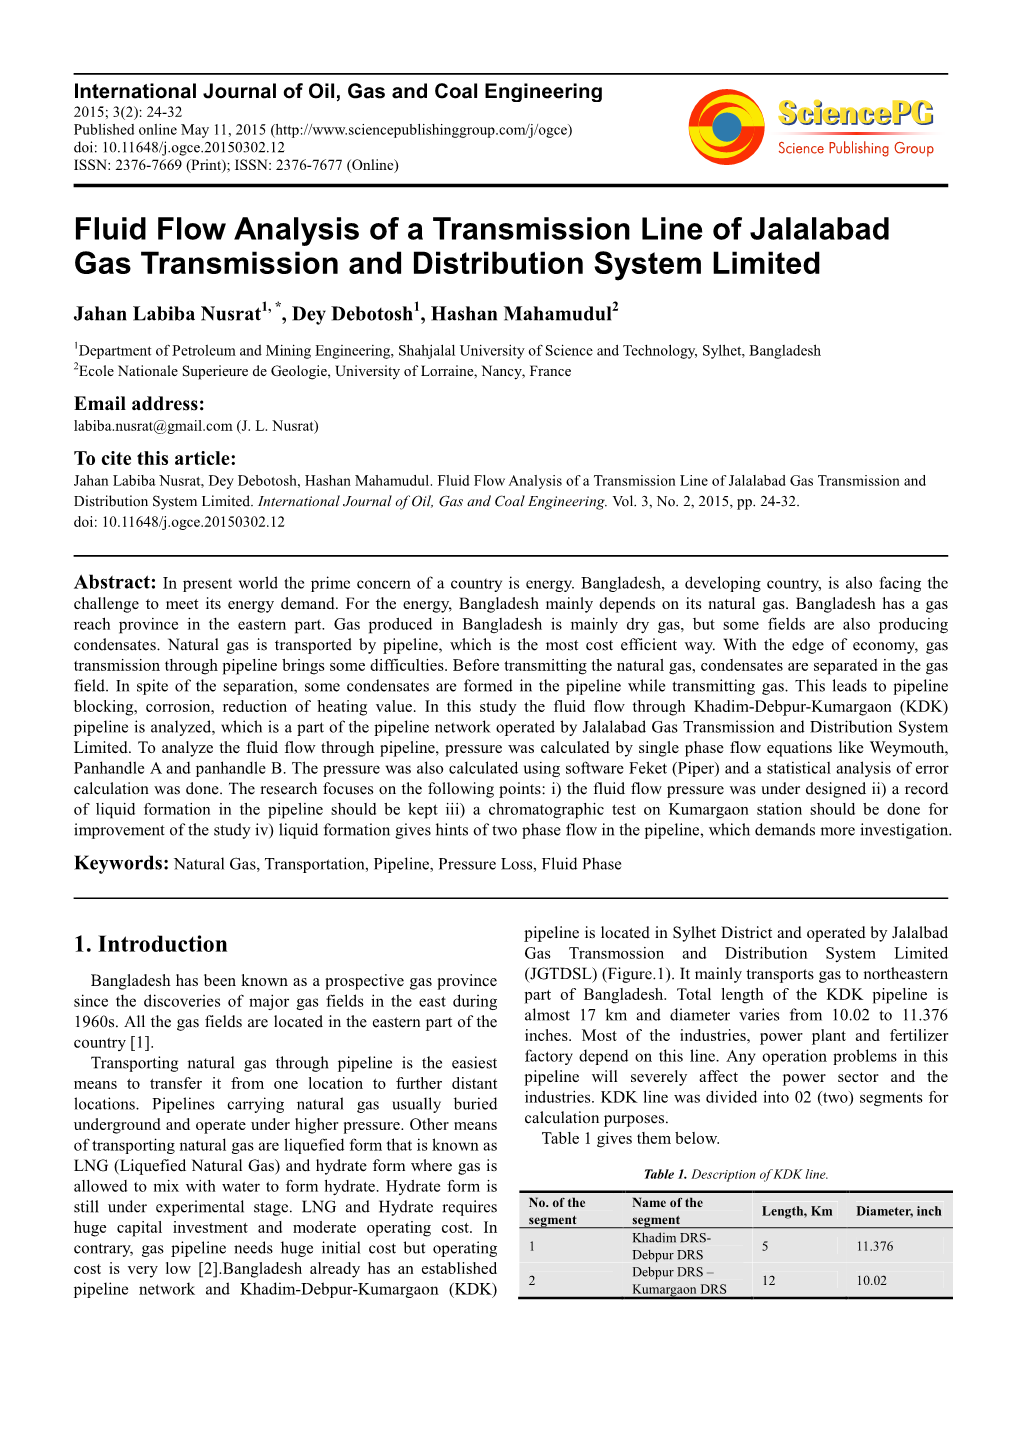 Fluid Flow Analysis of a Transmission Line of Jalalabad Gas Transmission and Distribution System Limited